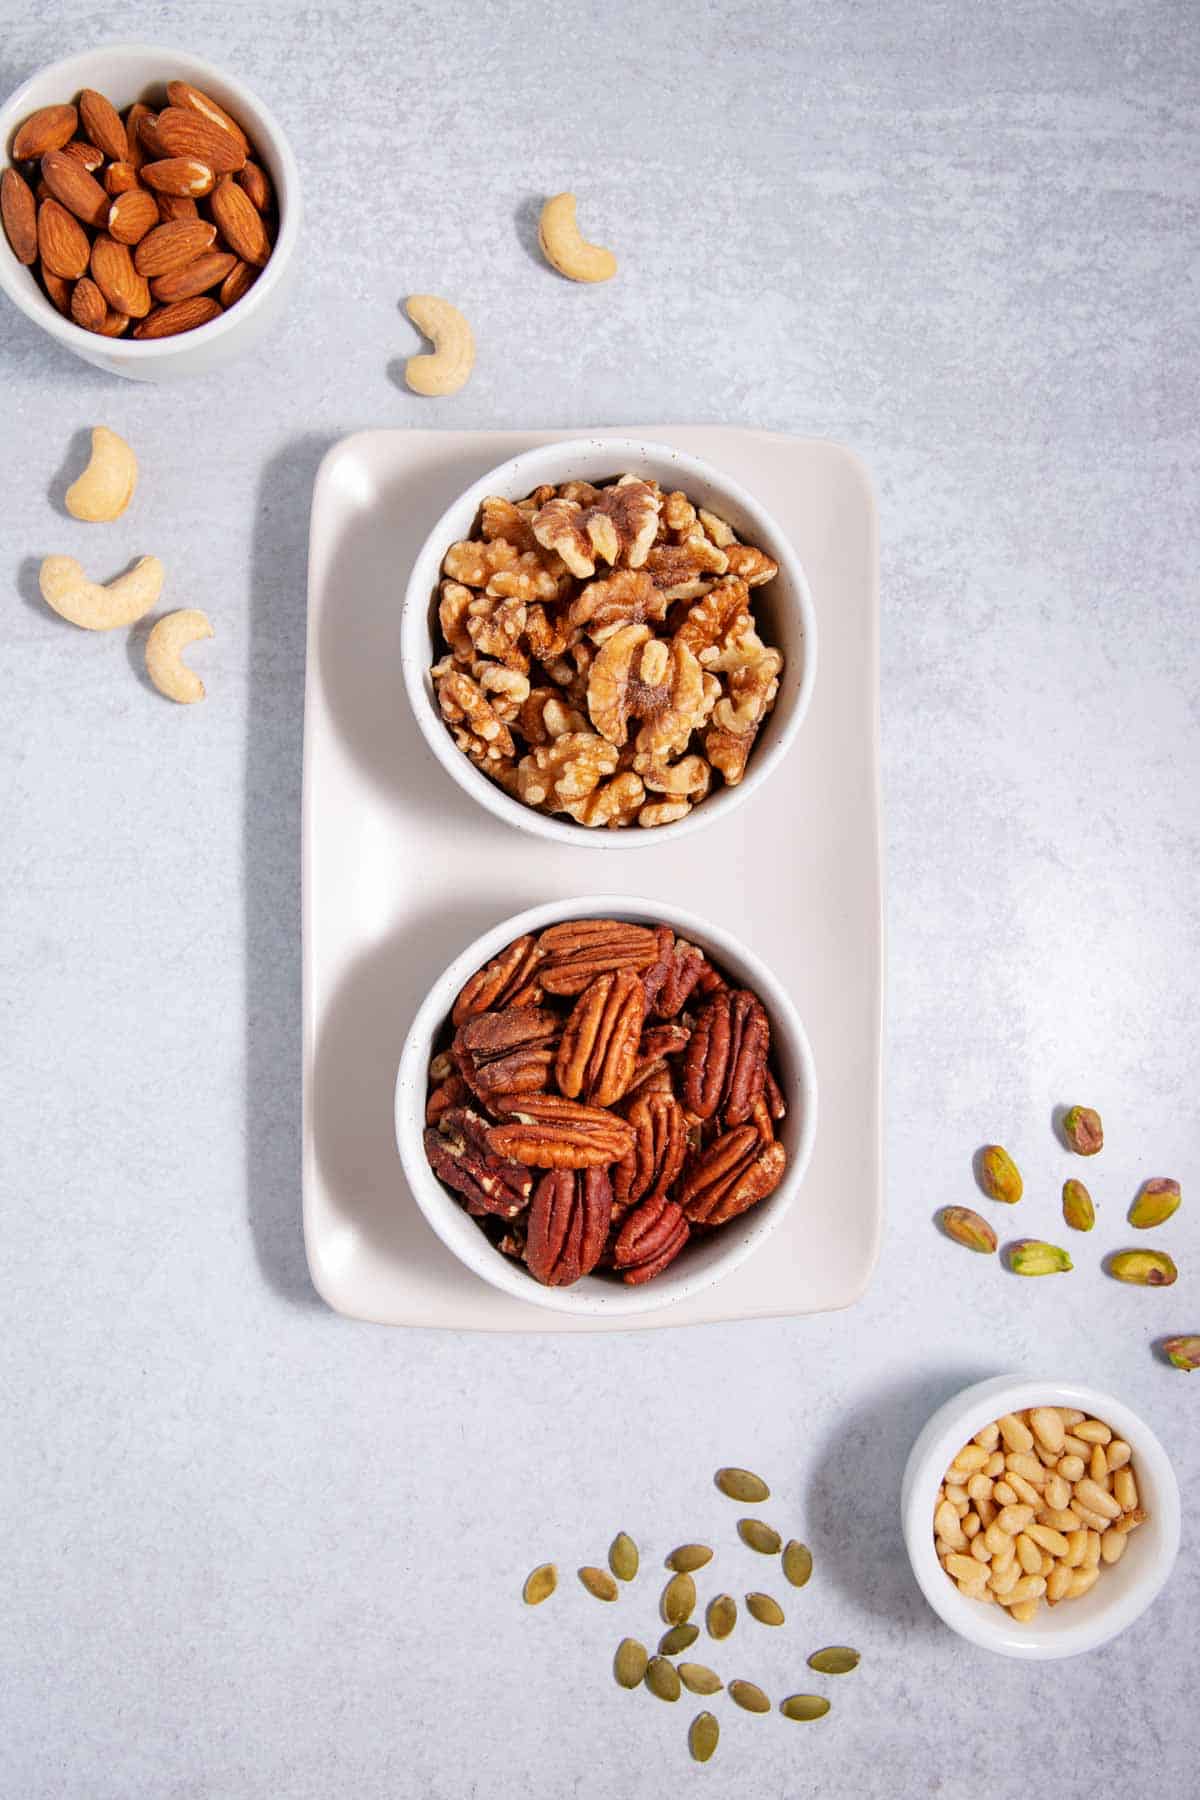 A variety of nuts in bowls.